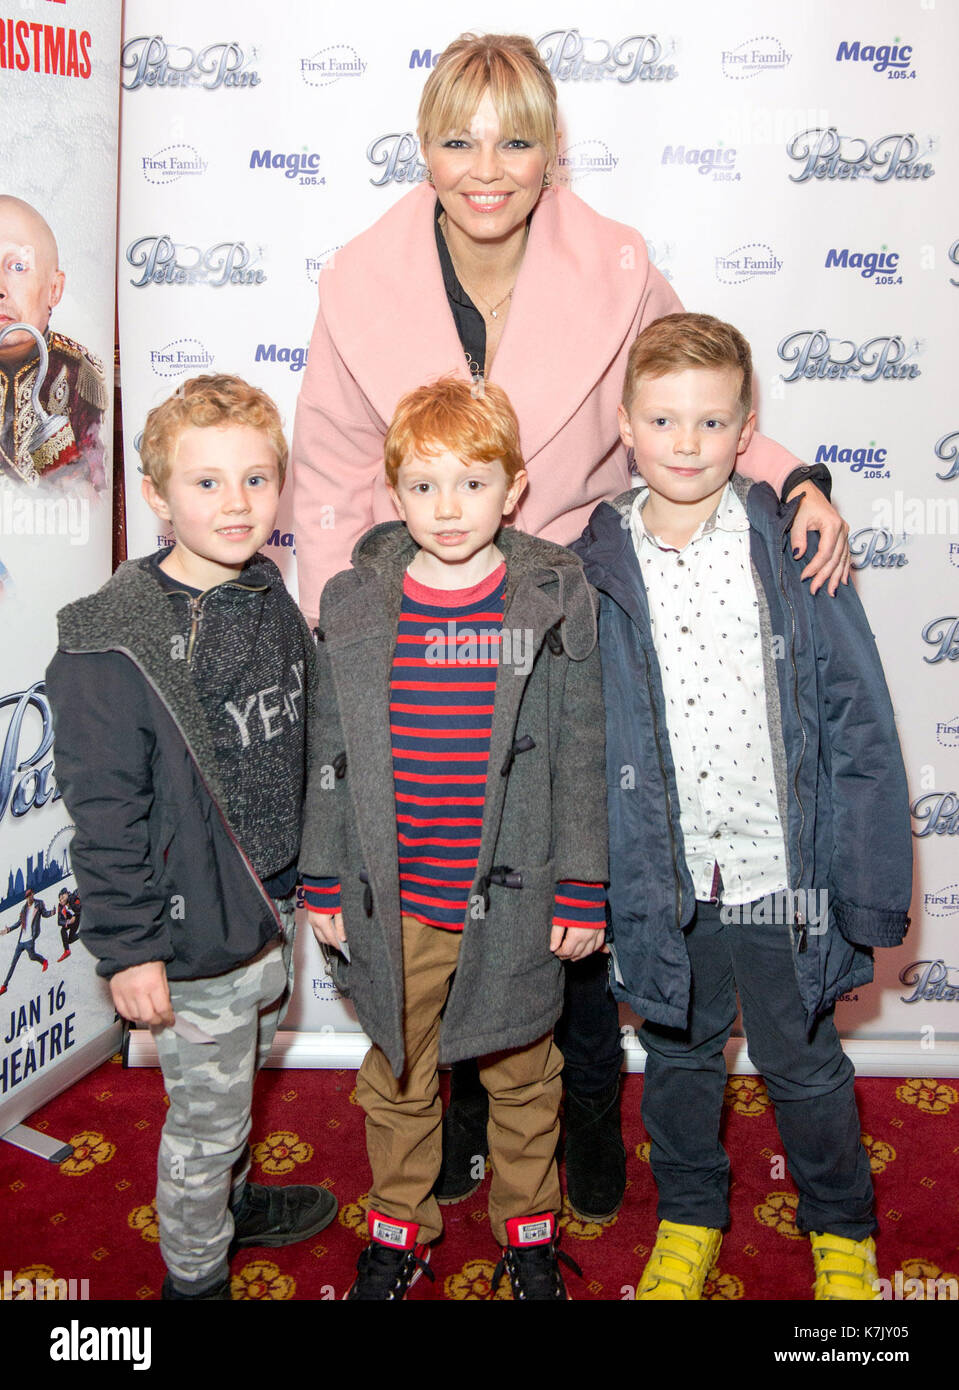 Photo Must Be Credited ©Alpha Press 074895 08/12/2015 Kate Thornton and guests at the Press Night of Peter Pan Pantomime at New Wimbledon Theatre in London. Stock Photo